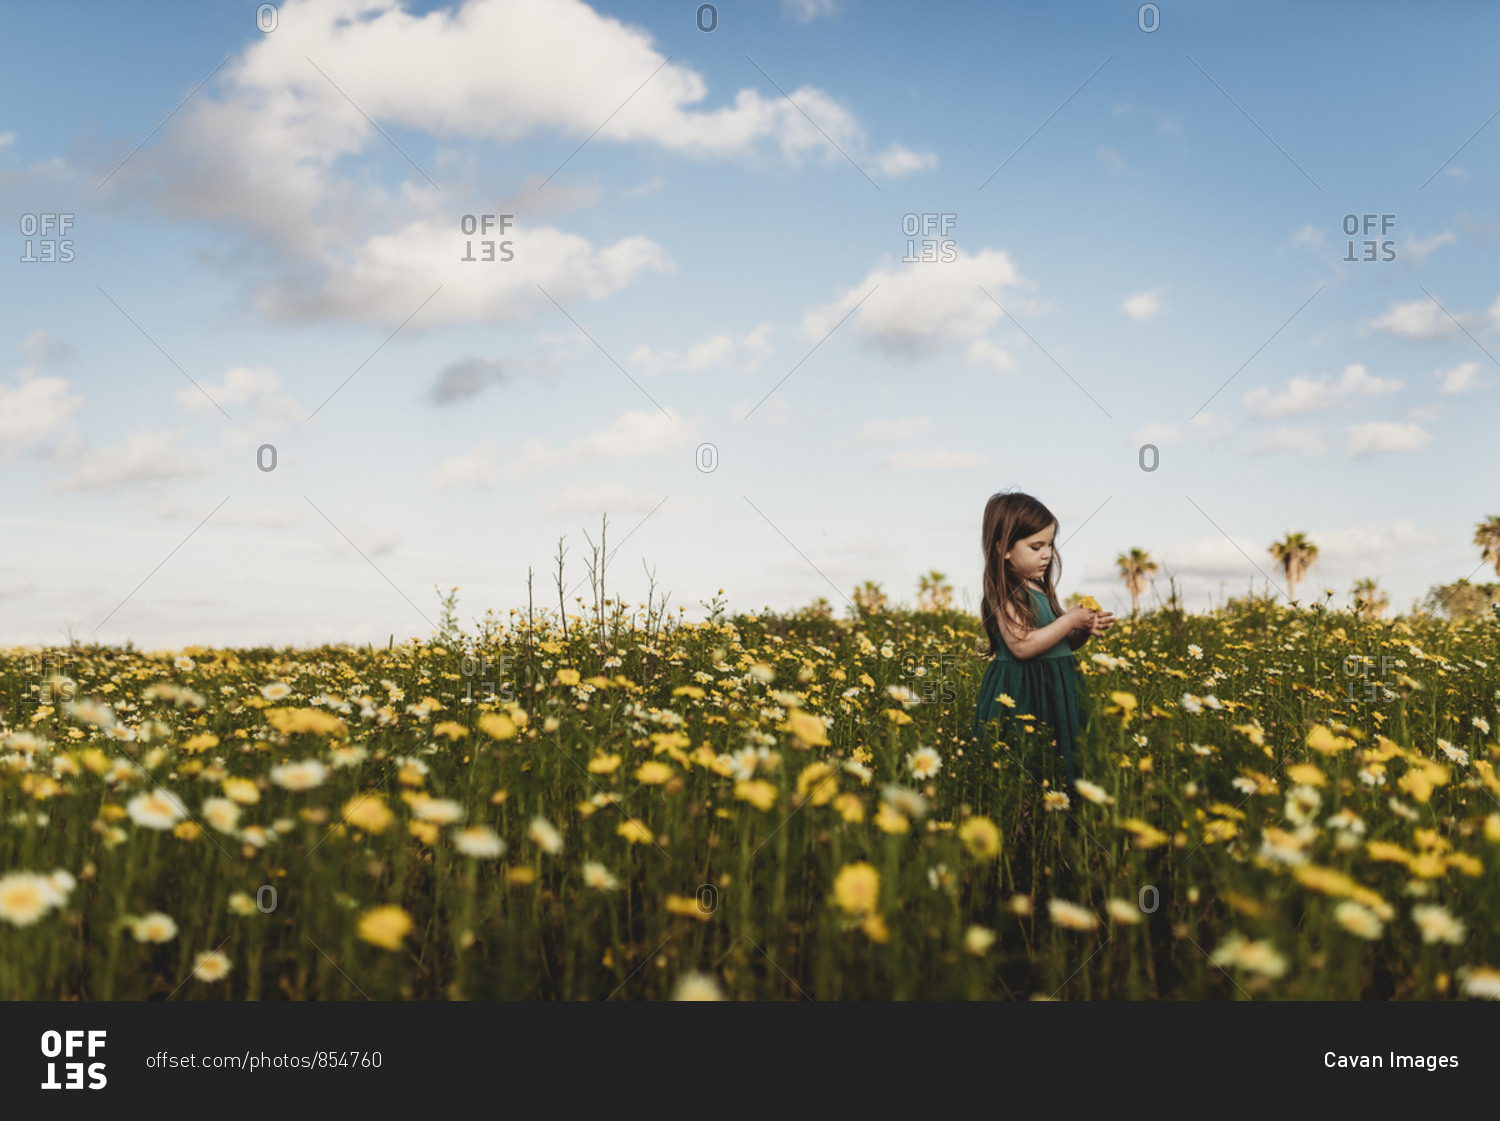 Little girl in dress standing in field of yellow flowers with blue sky